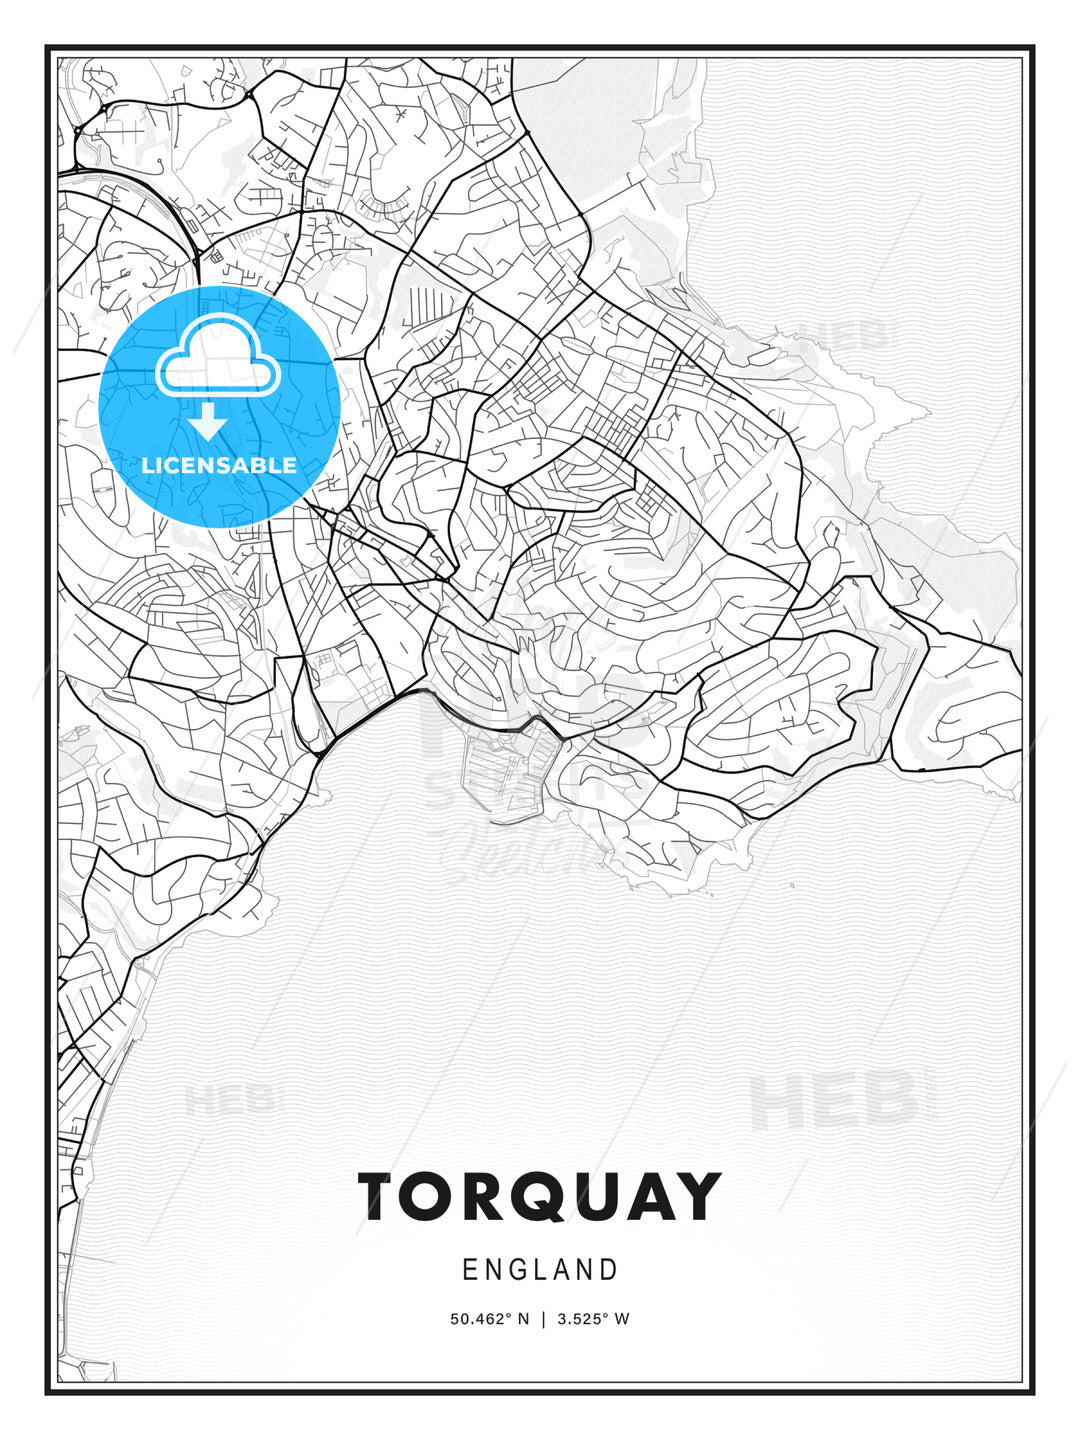 Torquay, England, Modern Print Template in Various Formats - HEBSTREITS Sketches